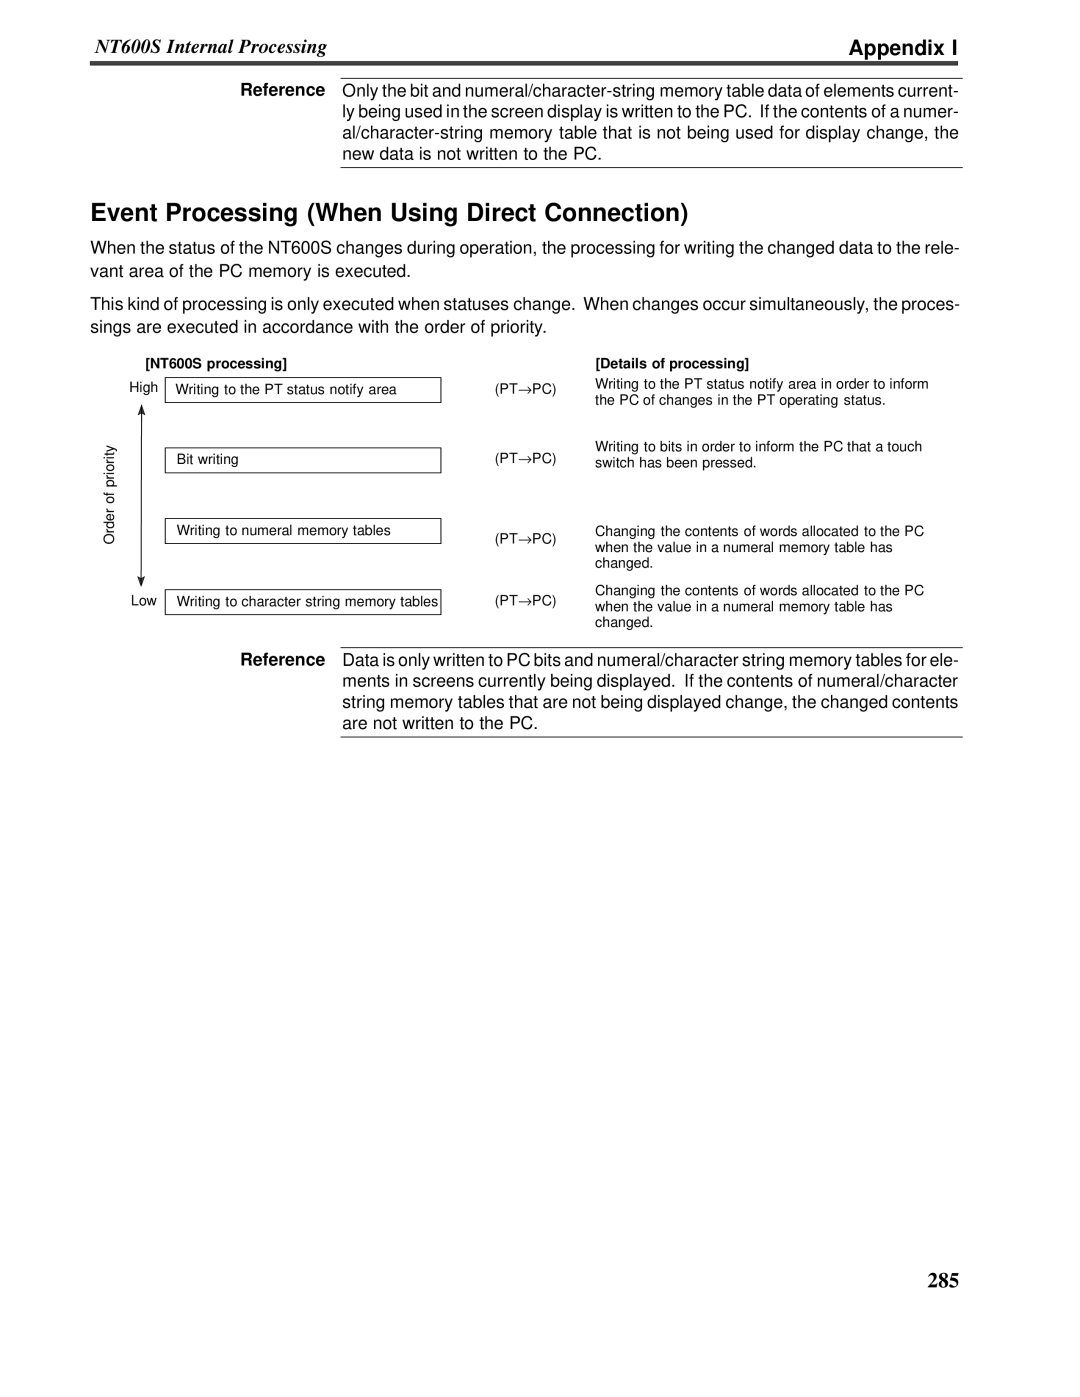 Omron V022-E3-1 Event Processing When Using Direct Connection, Appendix, NT600S processing, Details of processing 